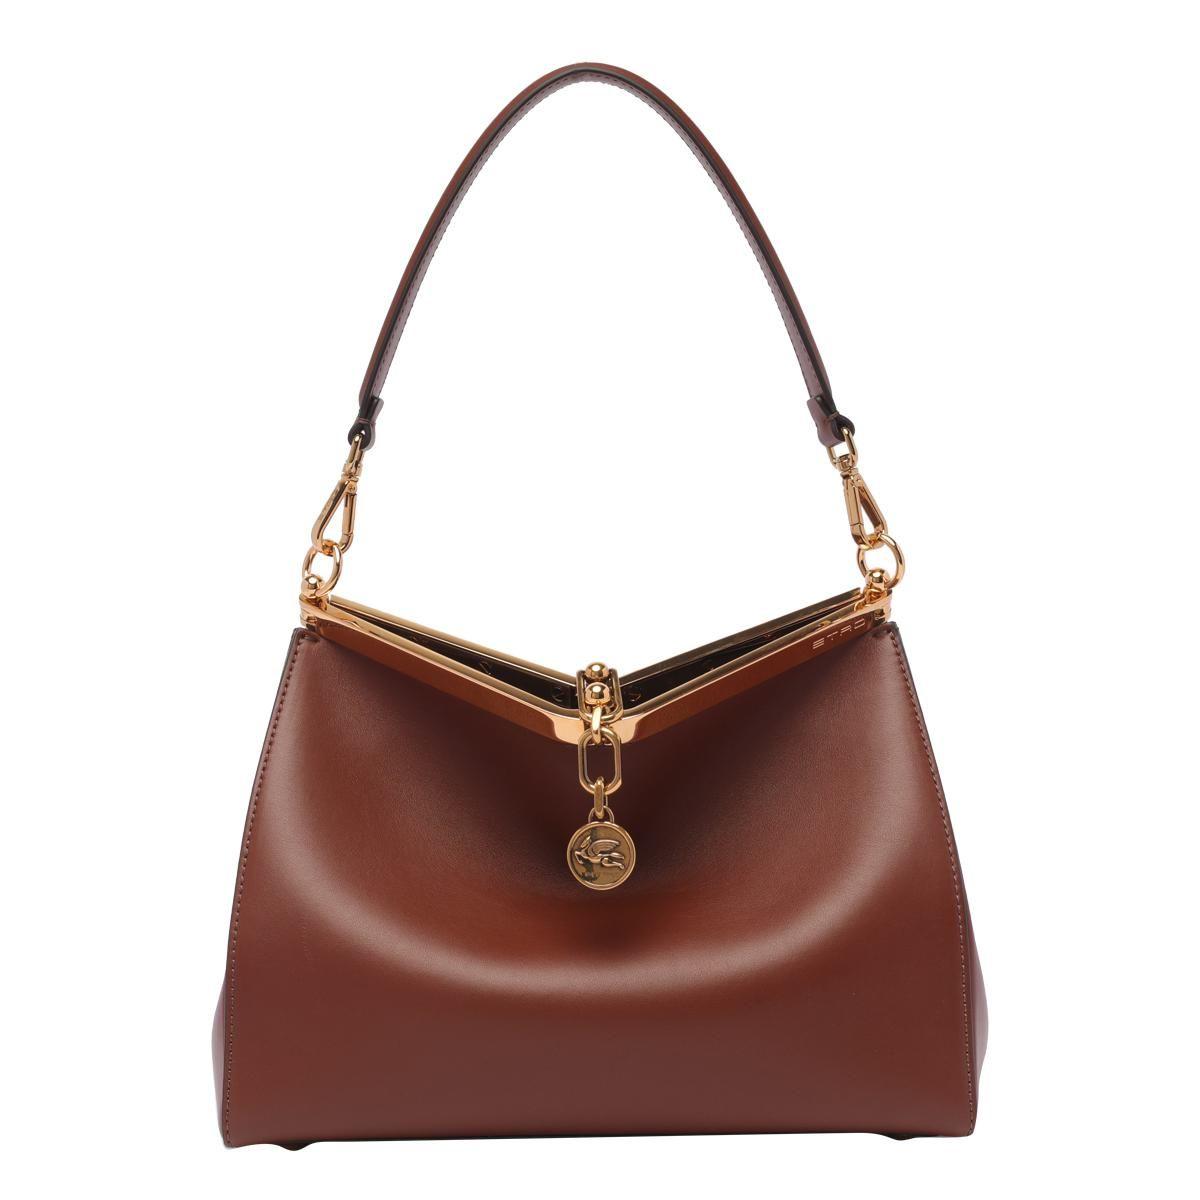 Etro Bag in Brown